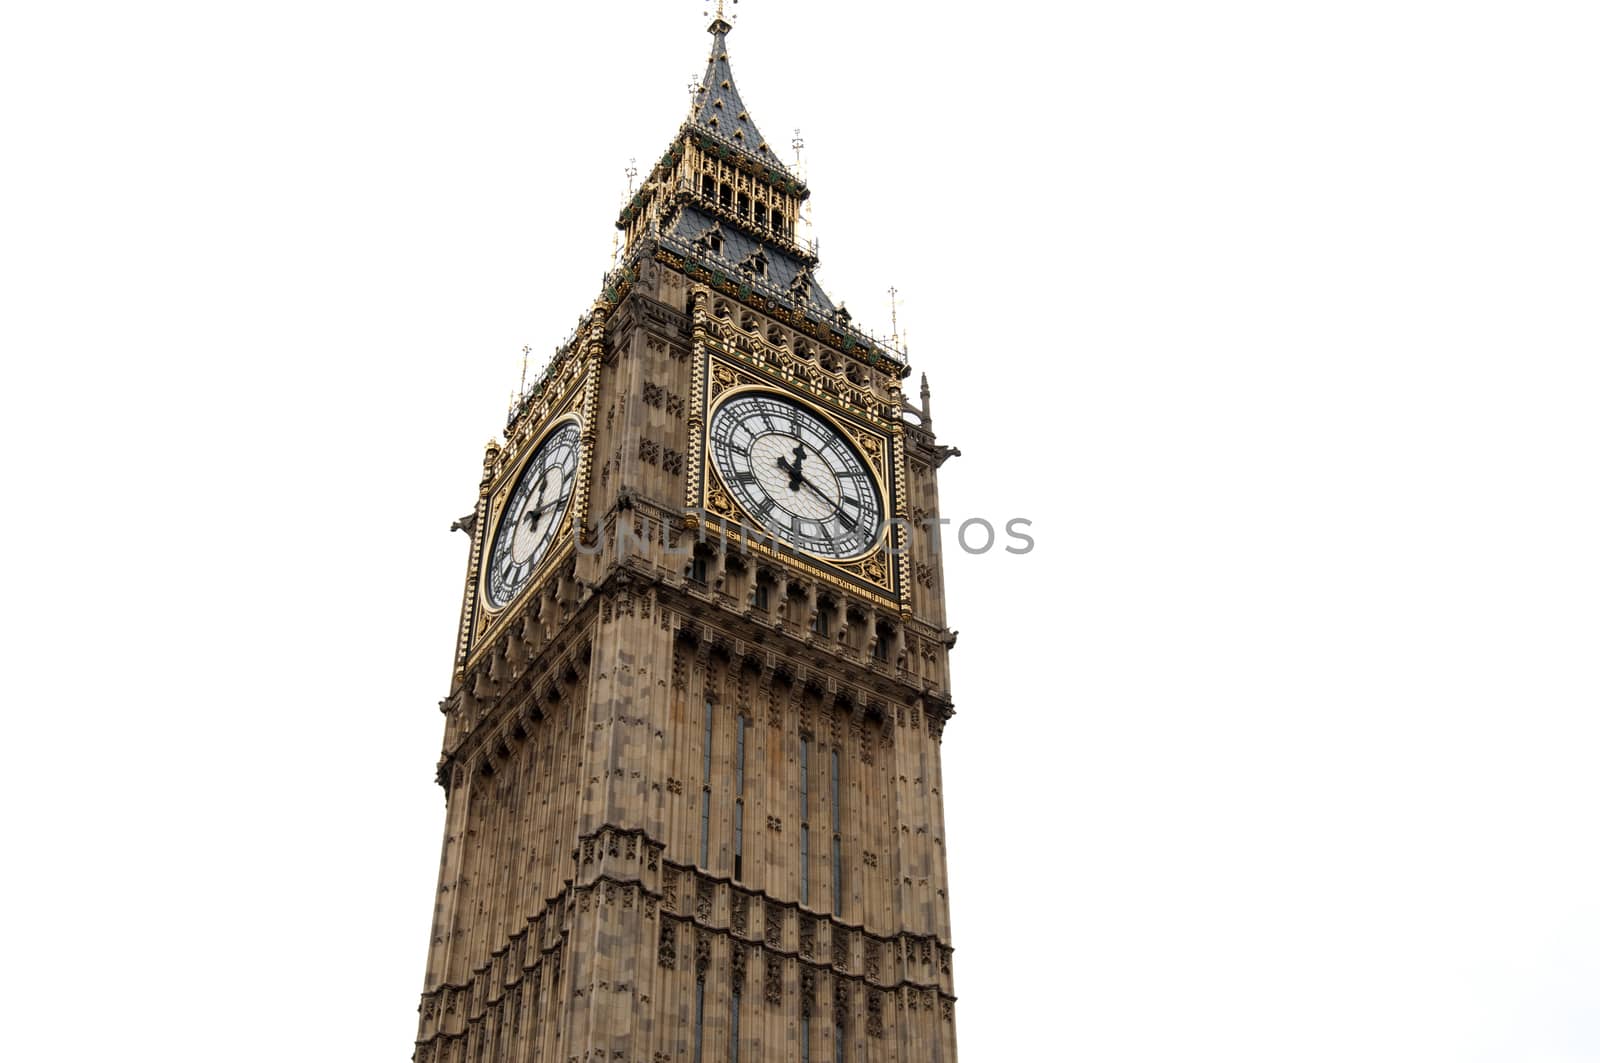 Big Ben is the nickname for the great bell of the clock at the north end of the Palace of Westminster in London, and often extended to refer to the clock and the clock tower. The tower is now officially called the Elizabeth Tower, after being renamed in 2012.